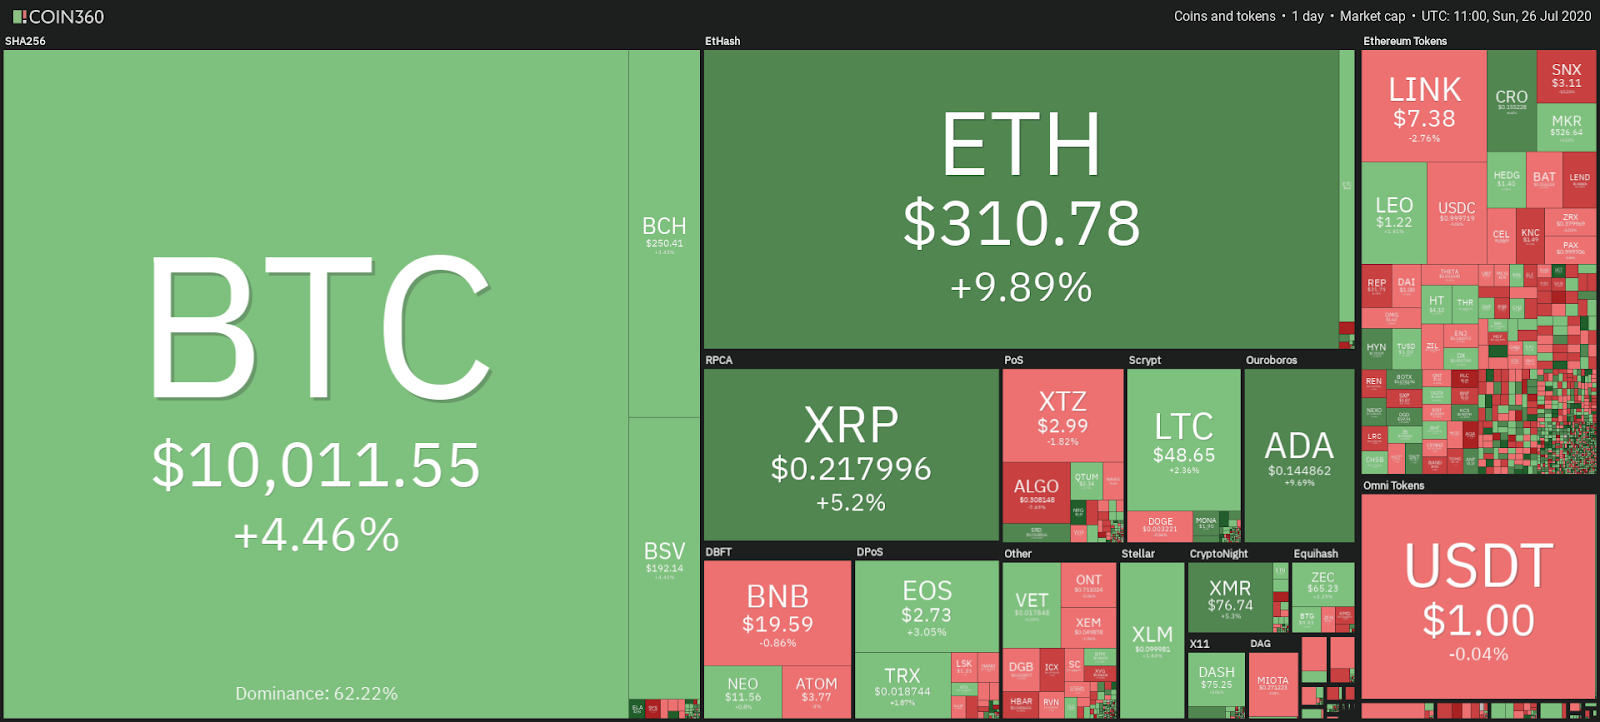 Cryptocurrency market performance July 26